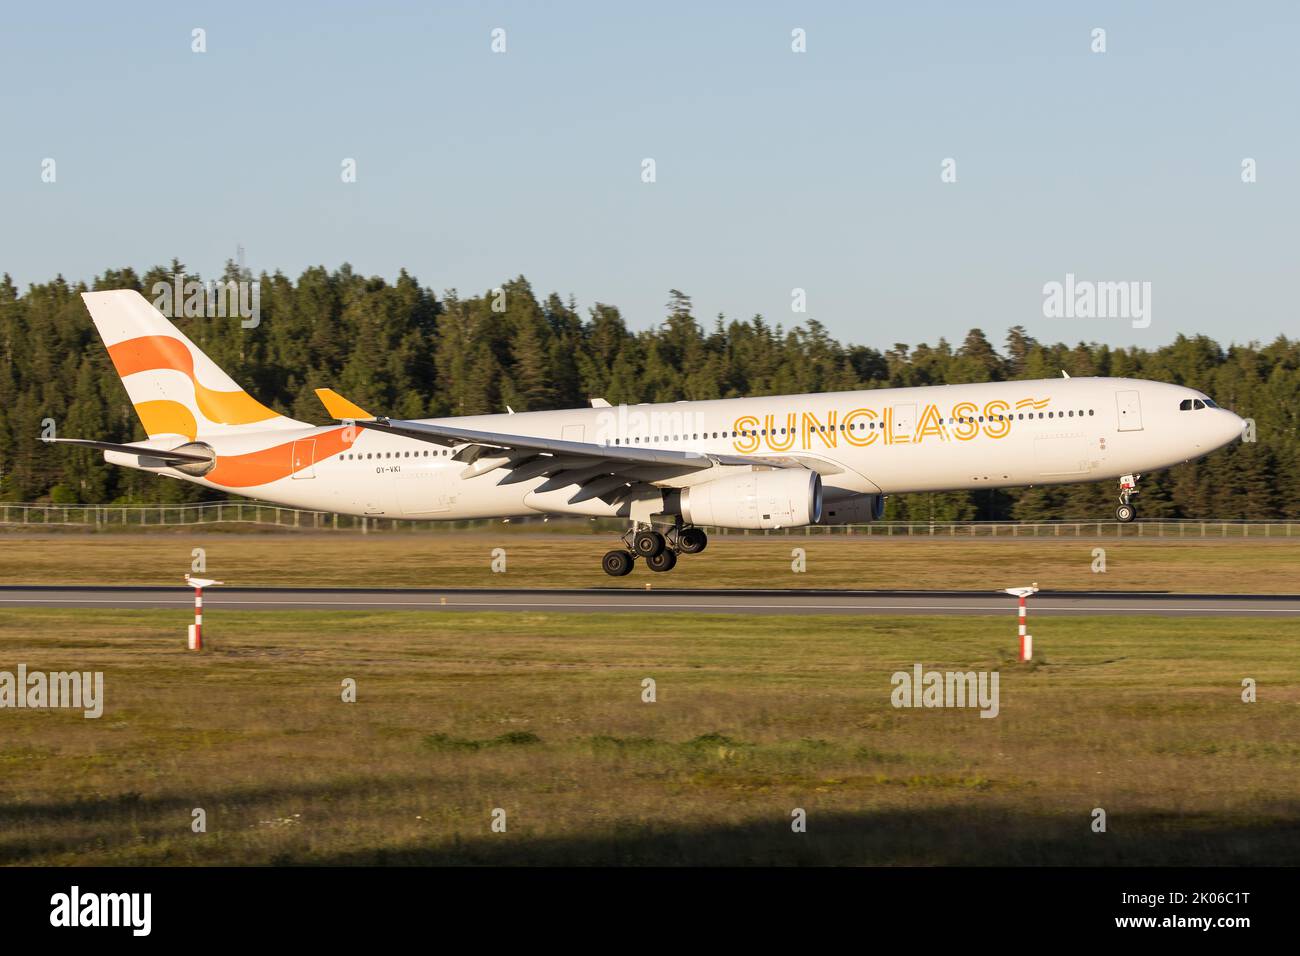 A Sunclass Airbus A330 Widebody jet landing in Oslo coming from a sunny holiday destination Stock Photo